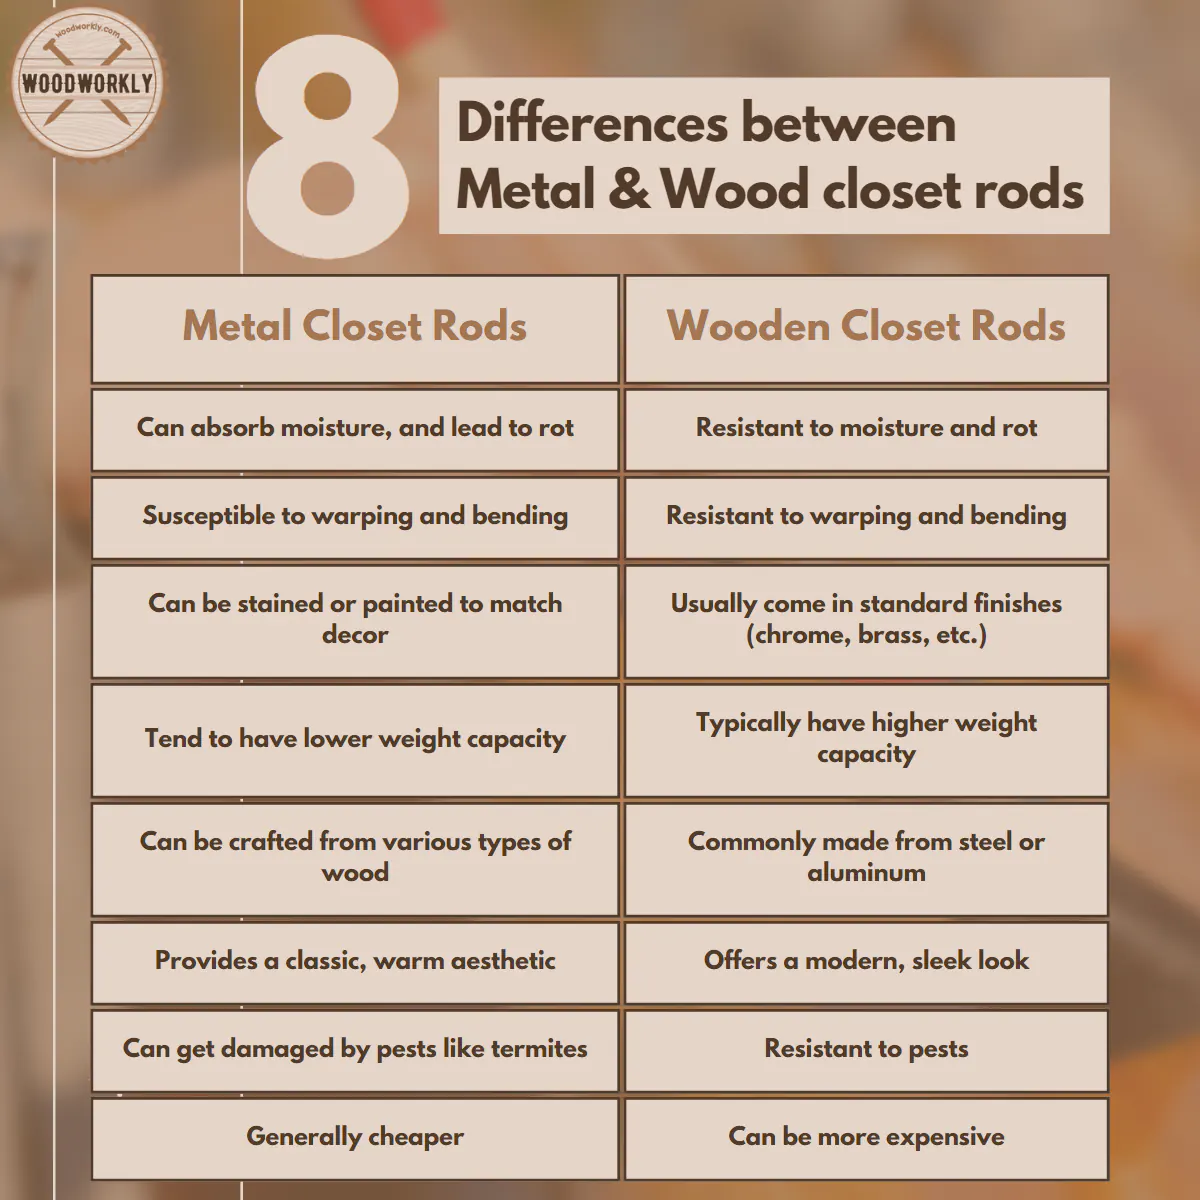 Differences between metal and wood clost rods